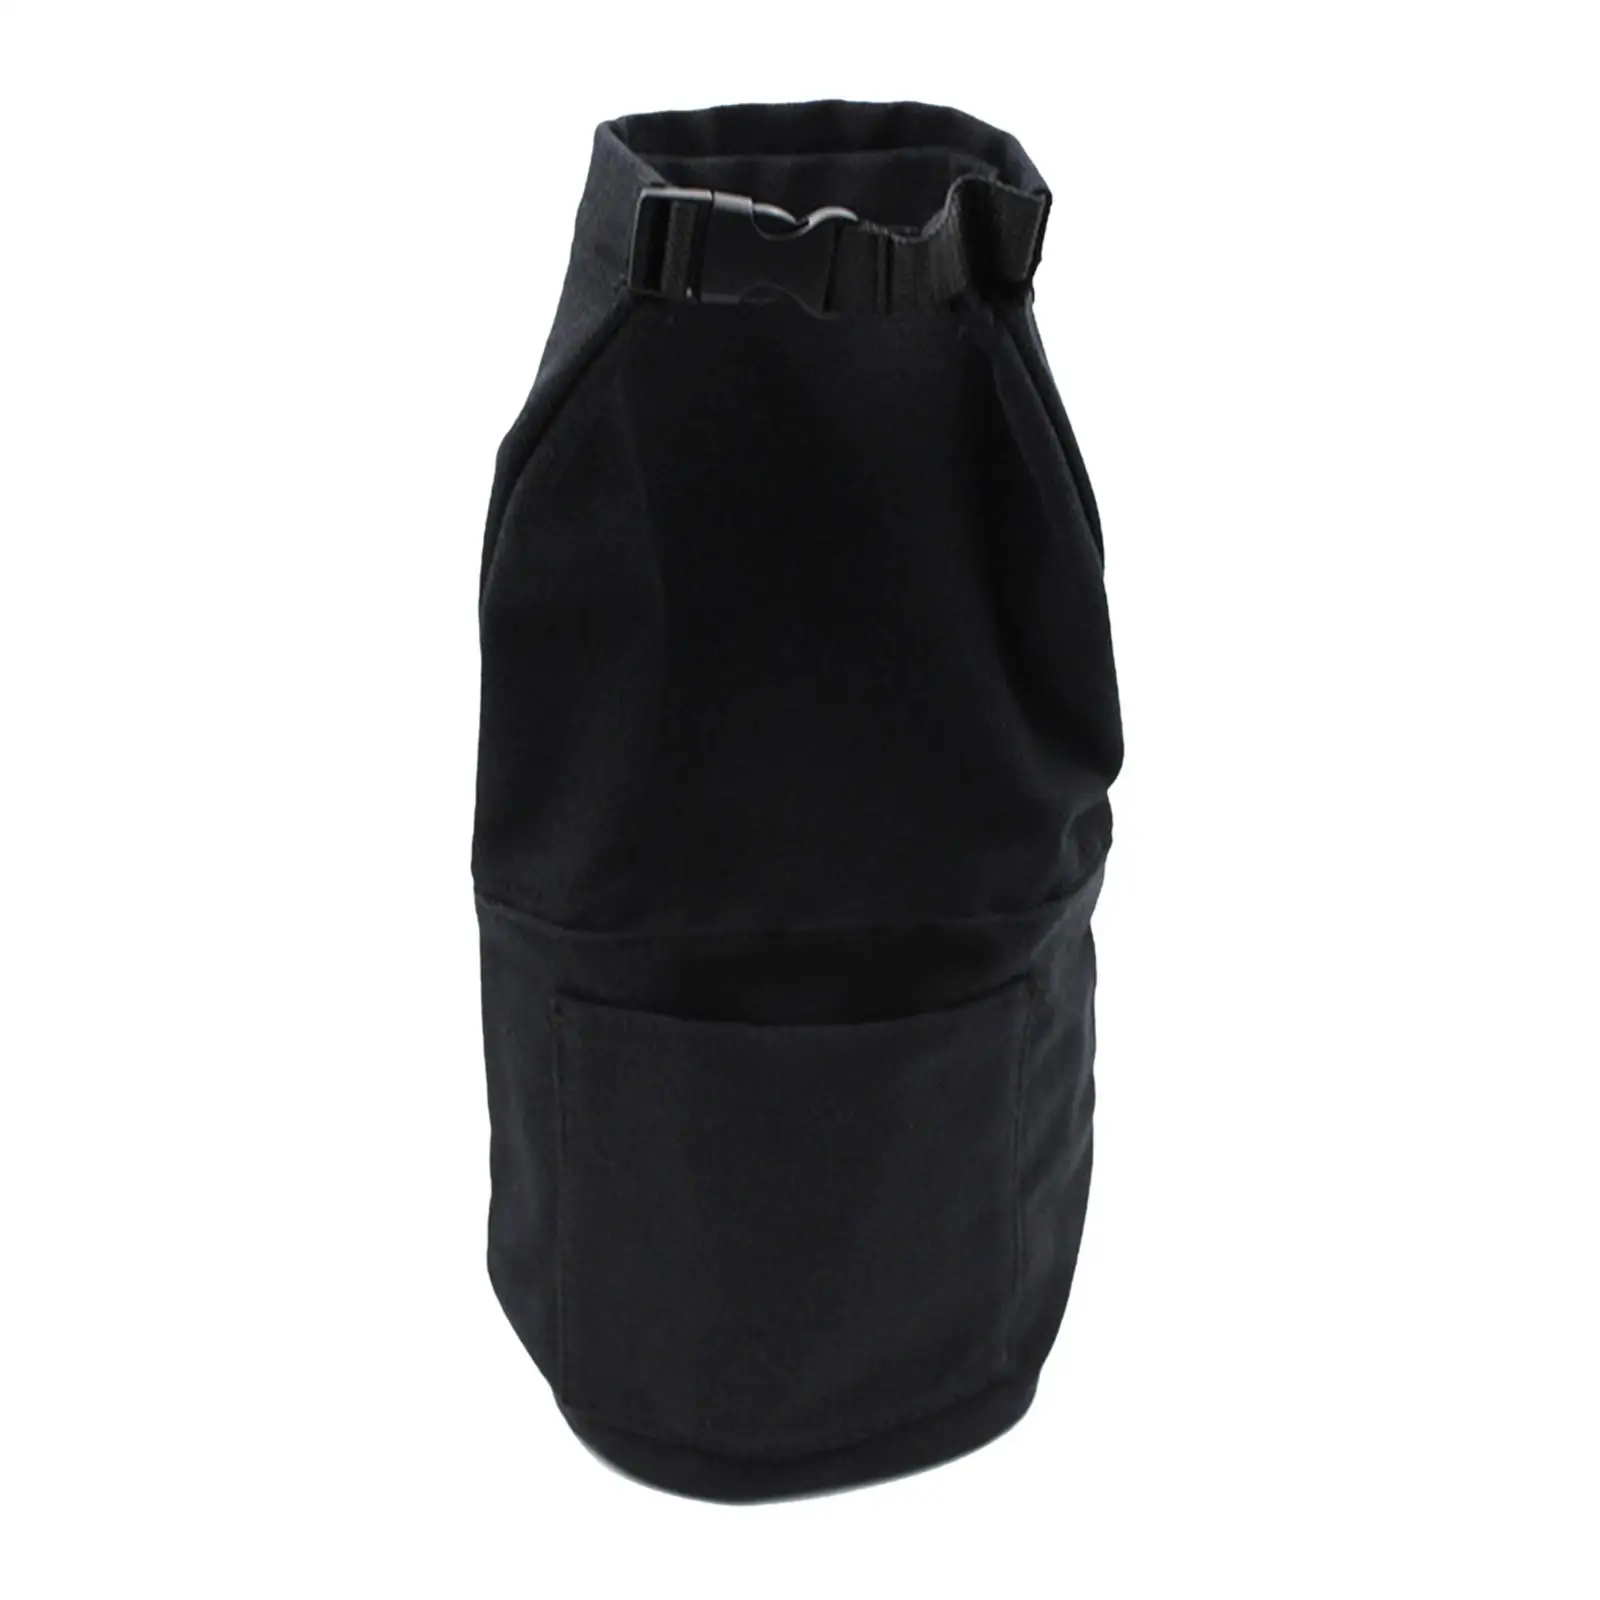 Gas Canister Lamp Storage Bag Camping Lantern Protective Case for Outdoor